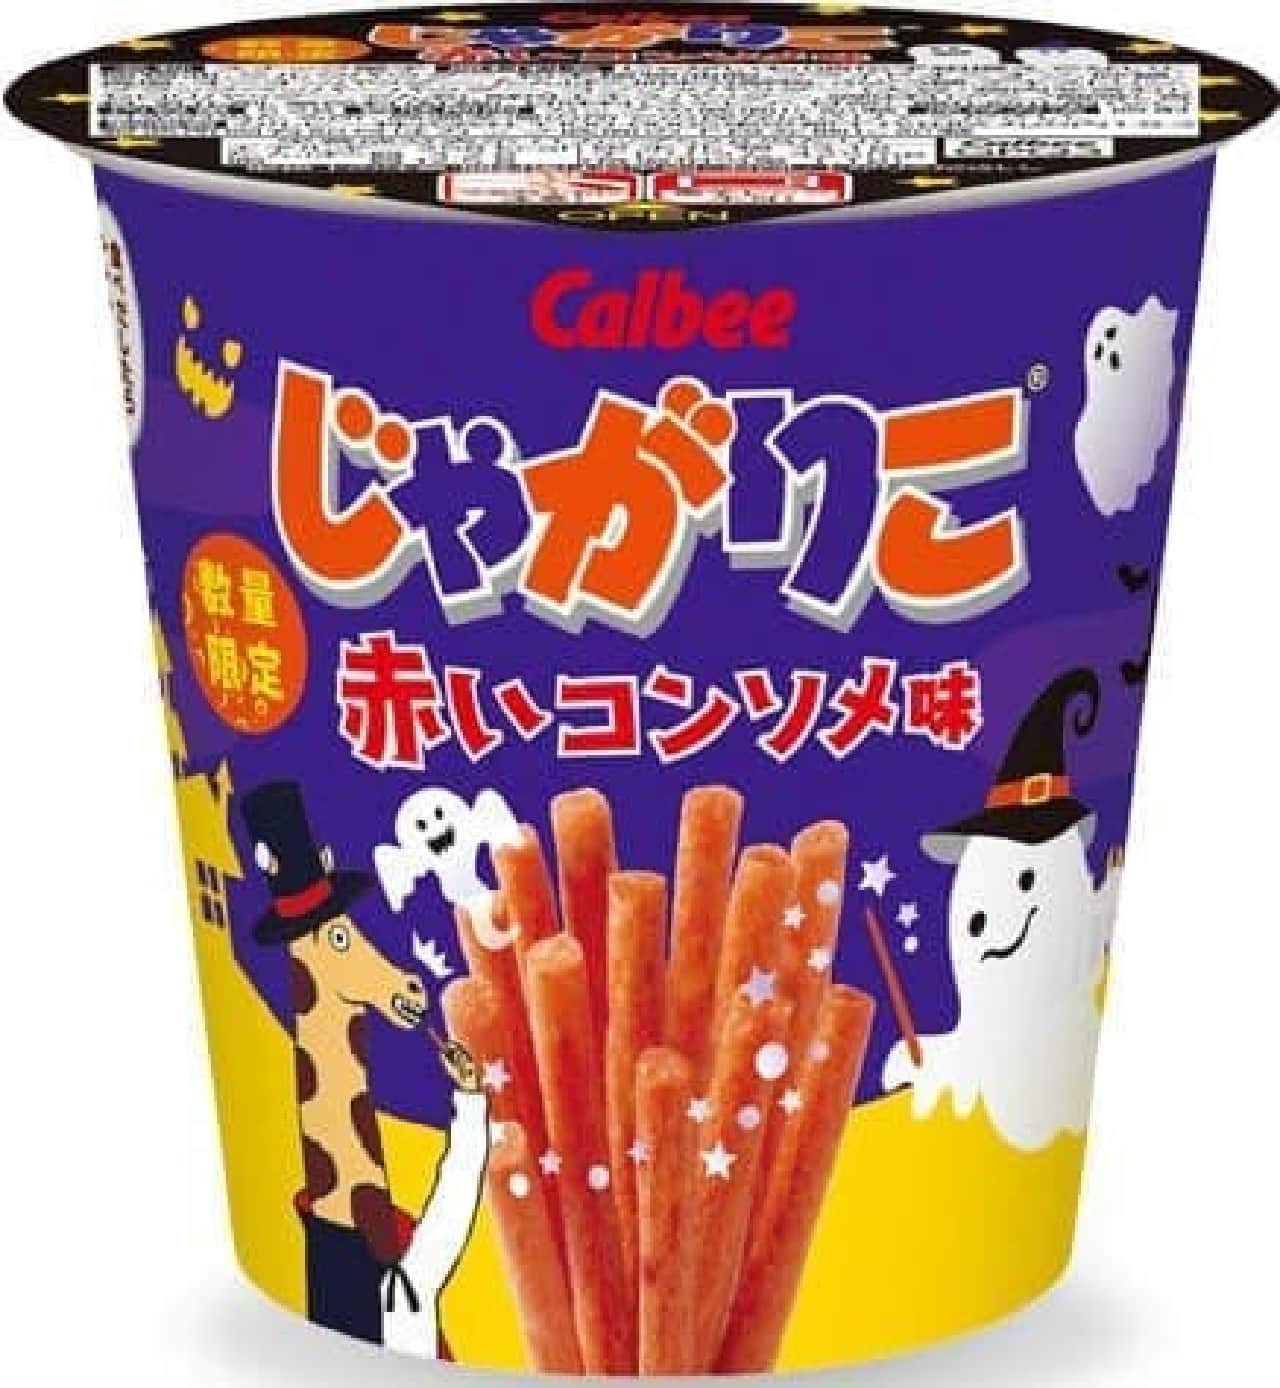 Calbee "Jagarico Red Consomme Flavor"